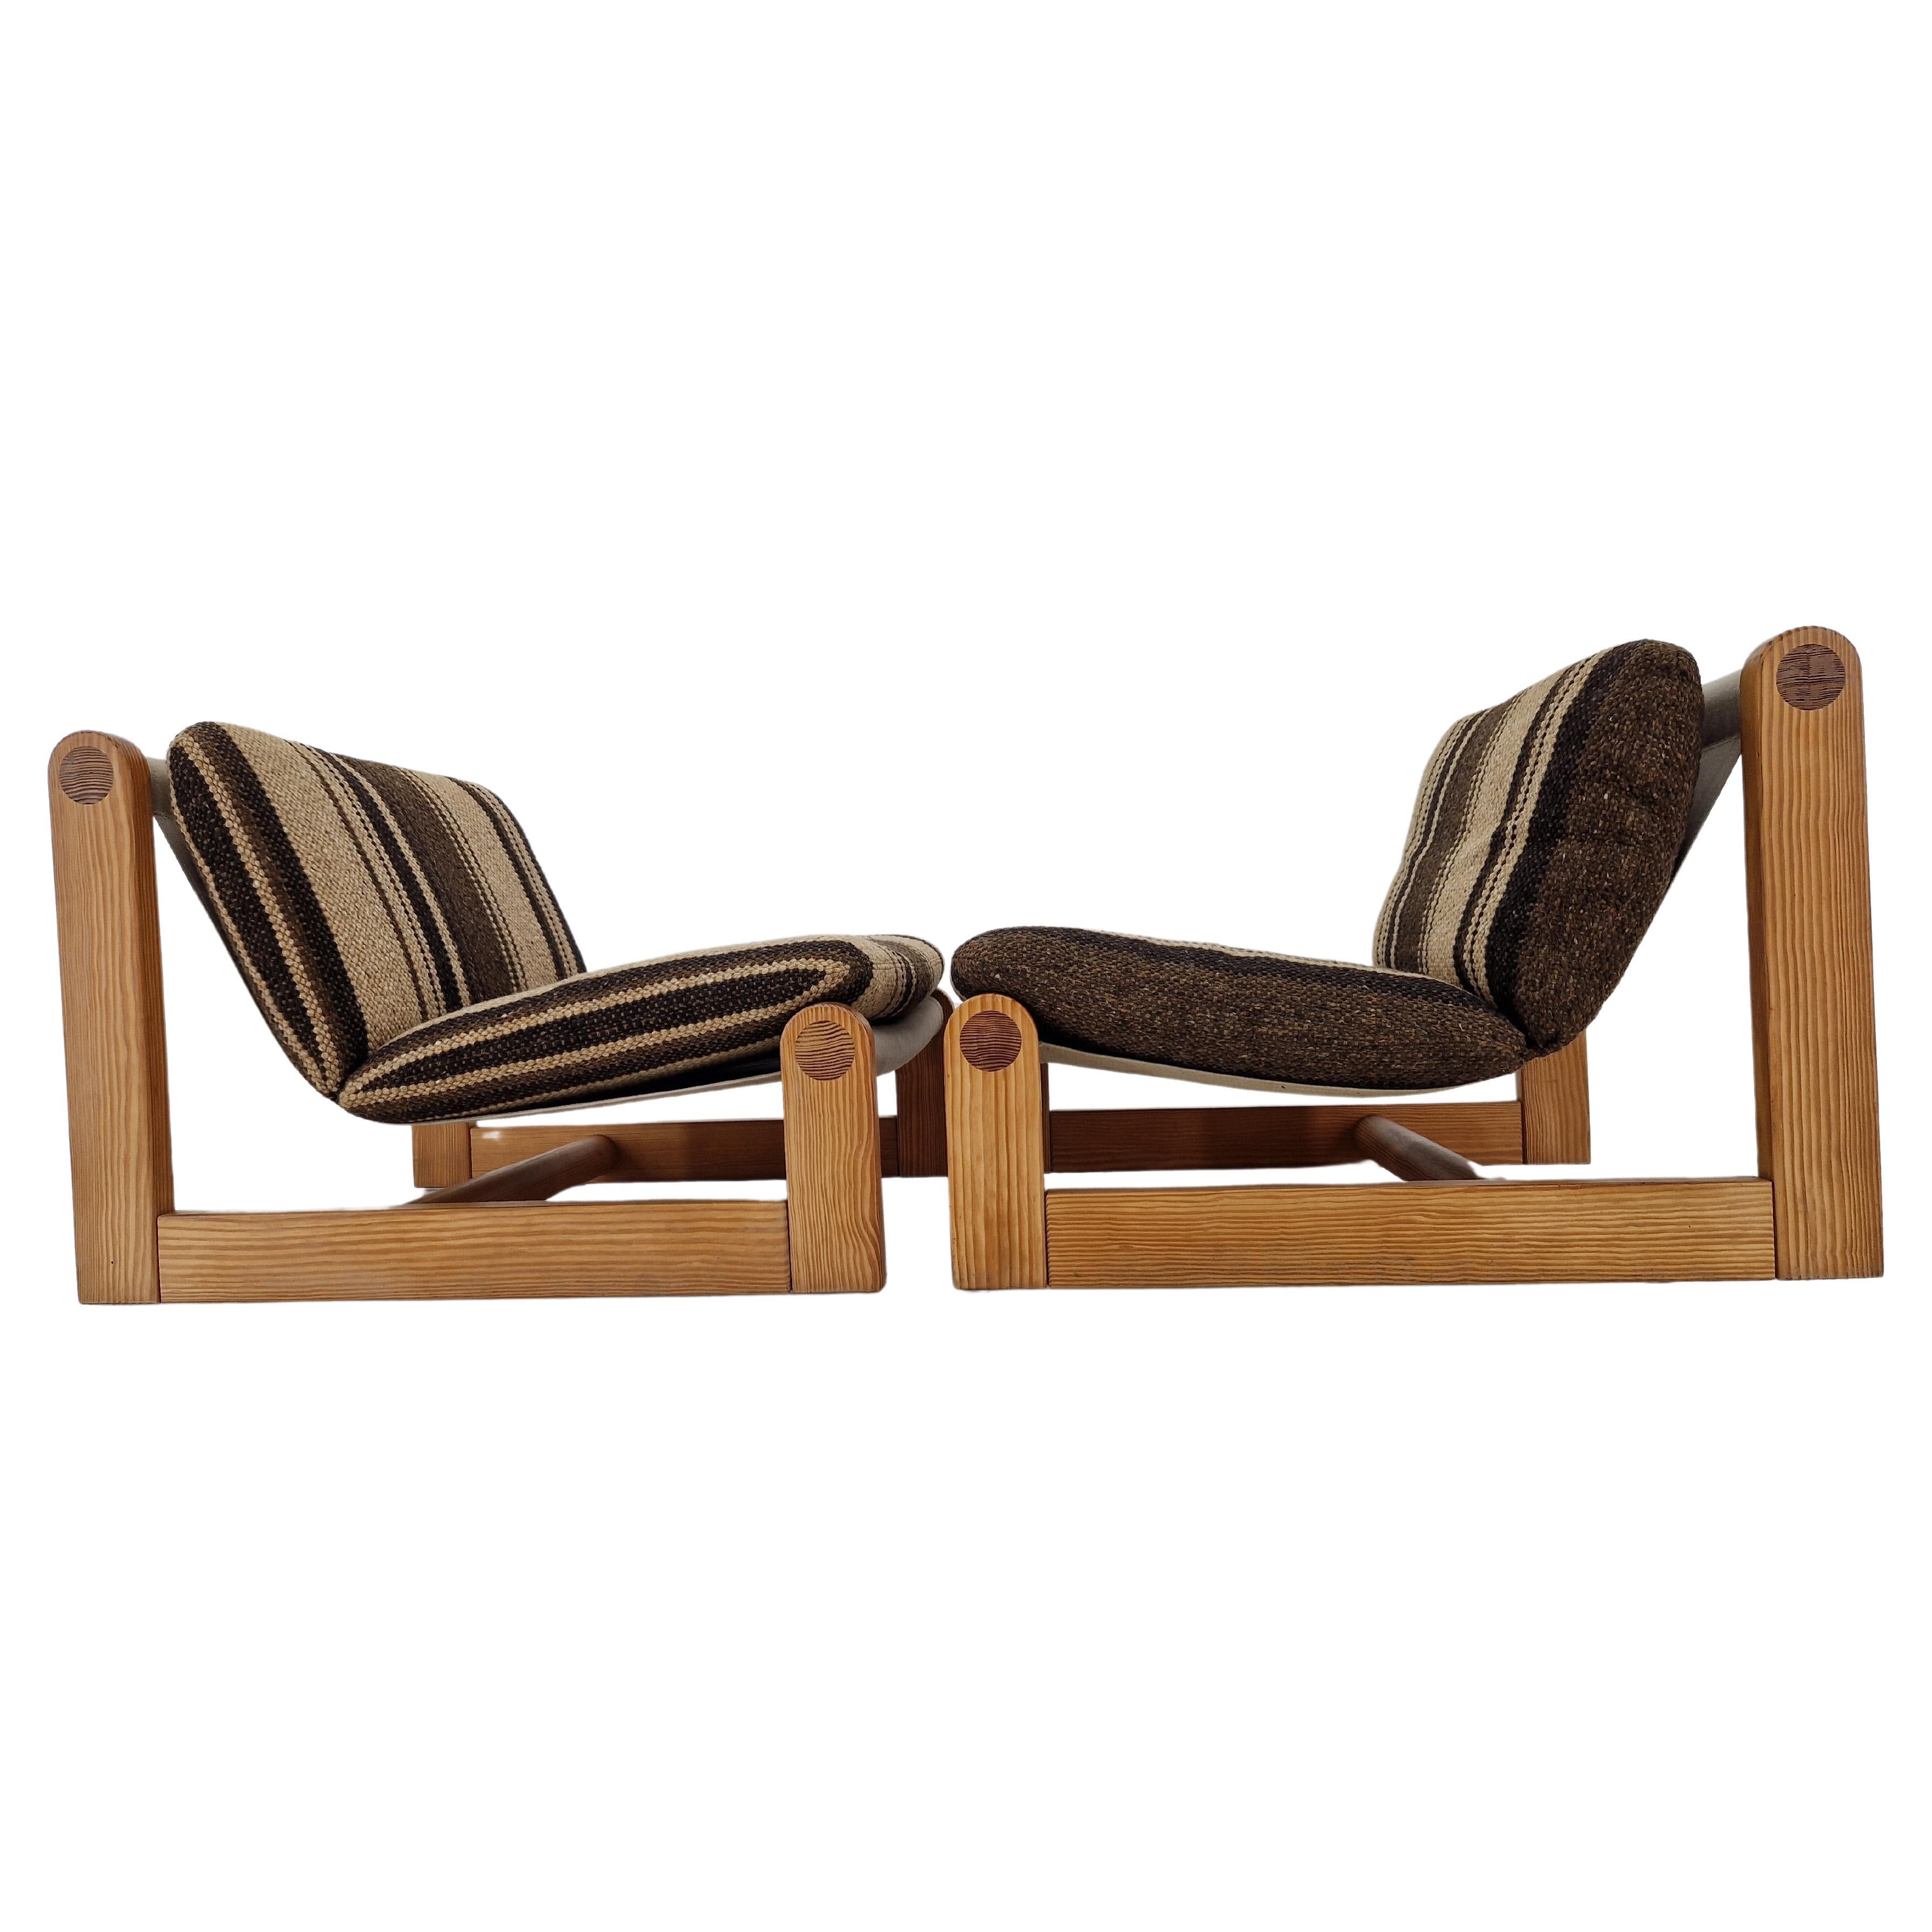 Pair of Midcentury Rare Lounge Chairs Pine Wood, Denmark, 1960s For Sale